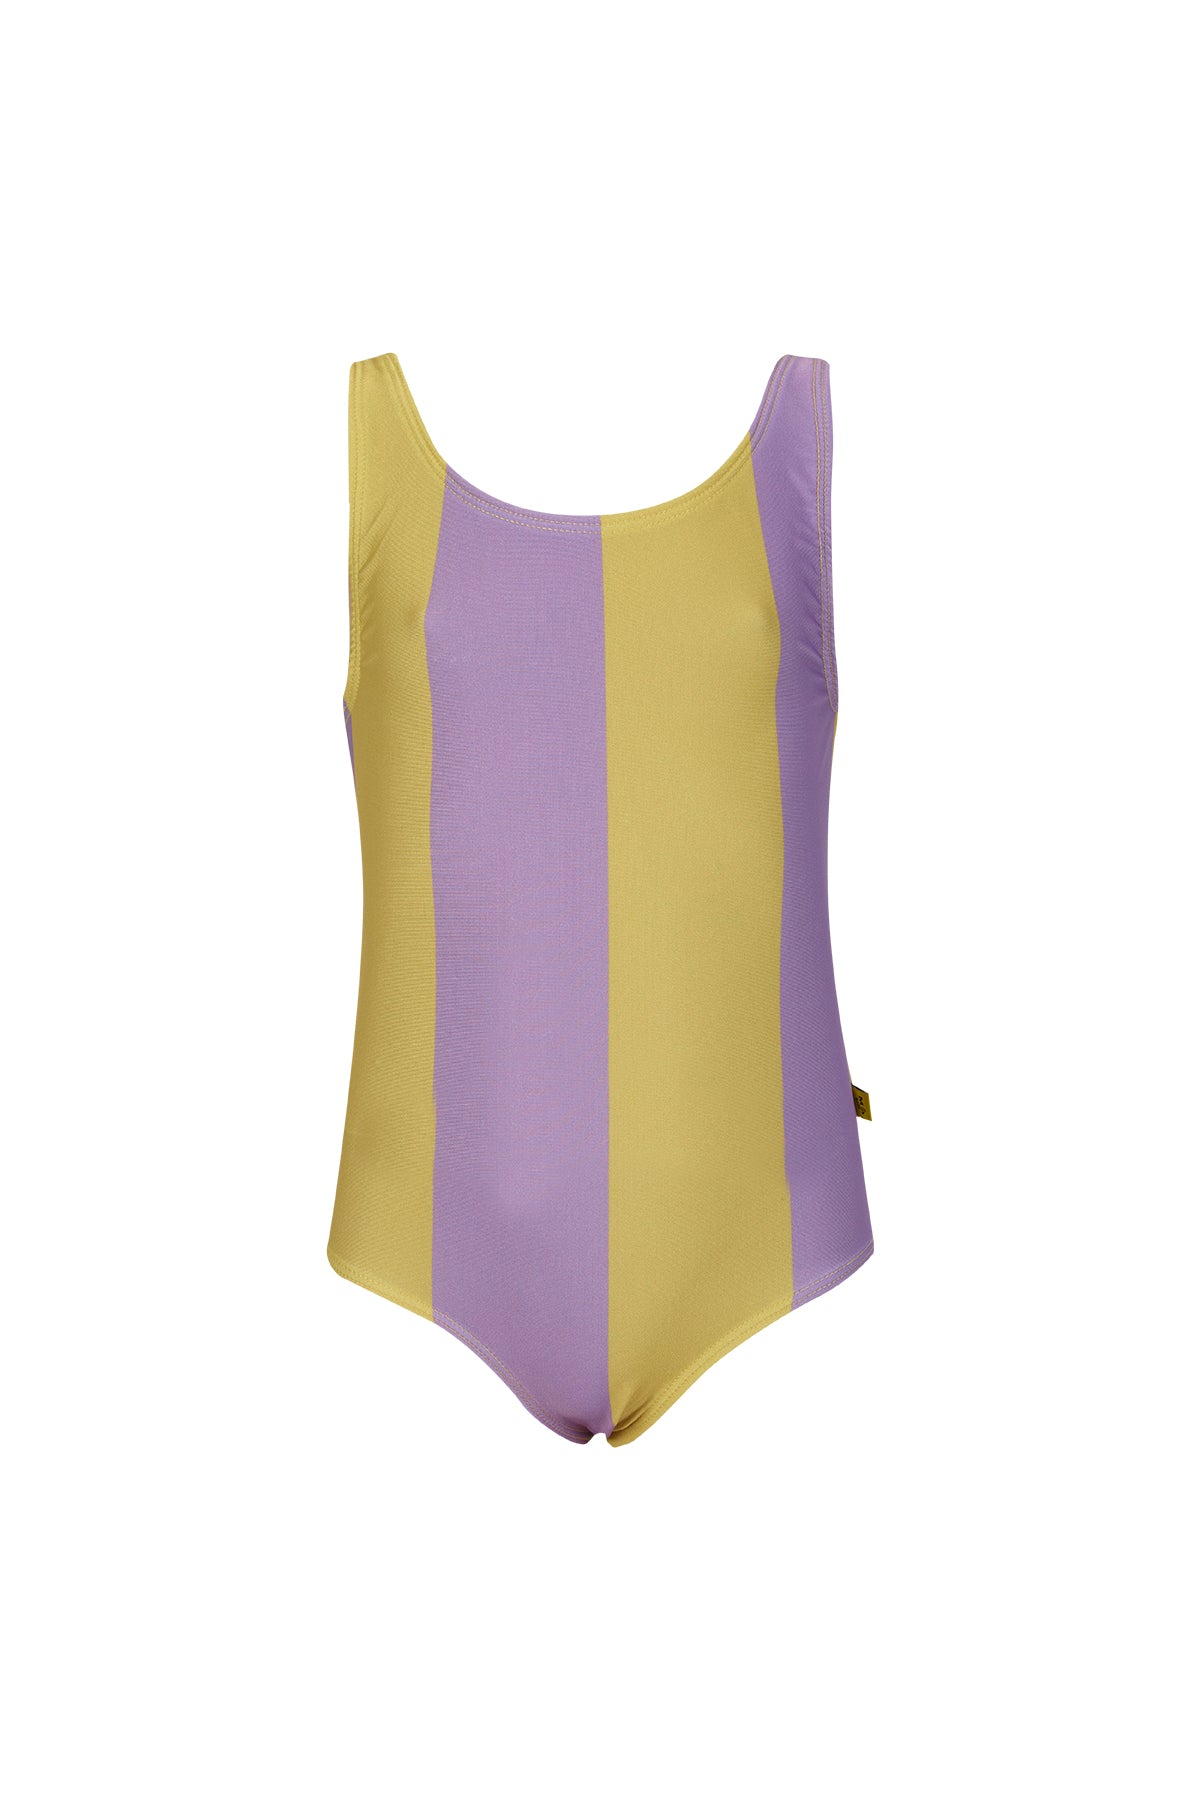 YELLOW AND LILAC SWIMSUIT makids